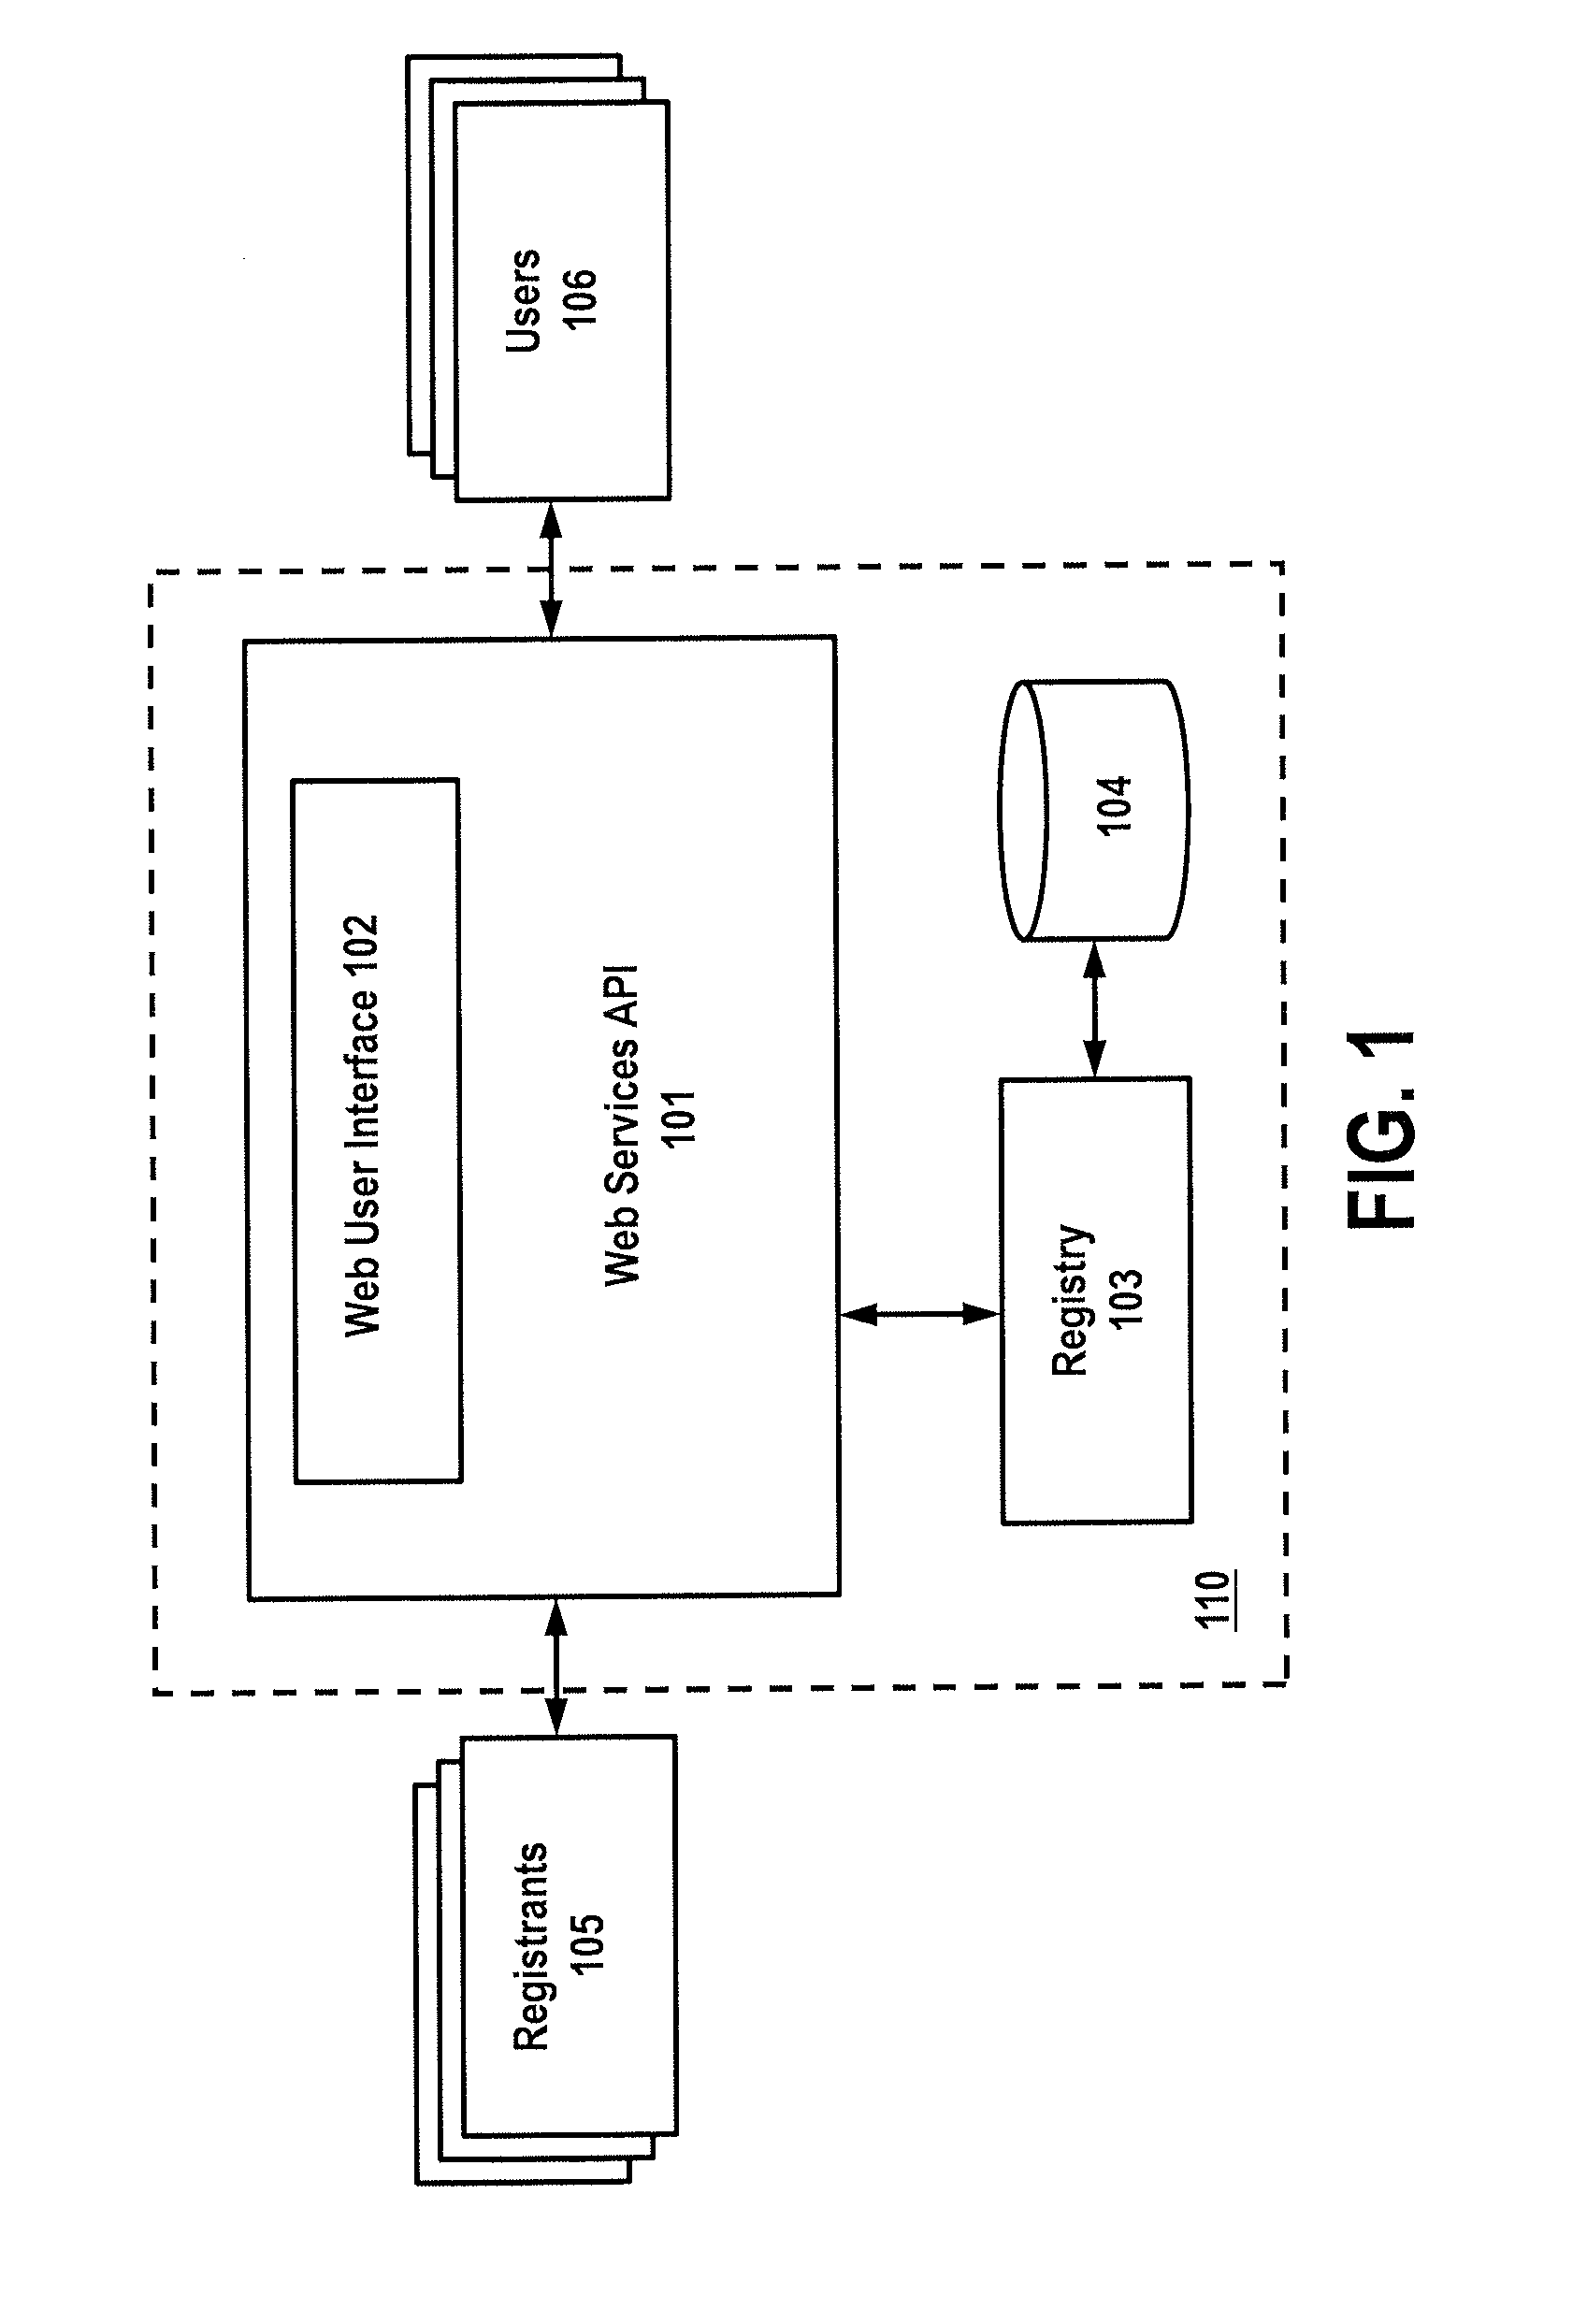 Systems Apparatus and Methods for Encoding/Decoding Persistent Universal Media Codes to Encoded Audio